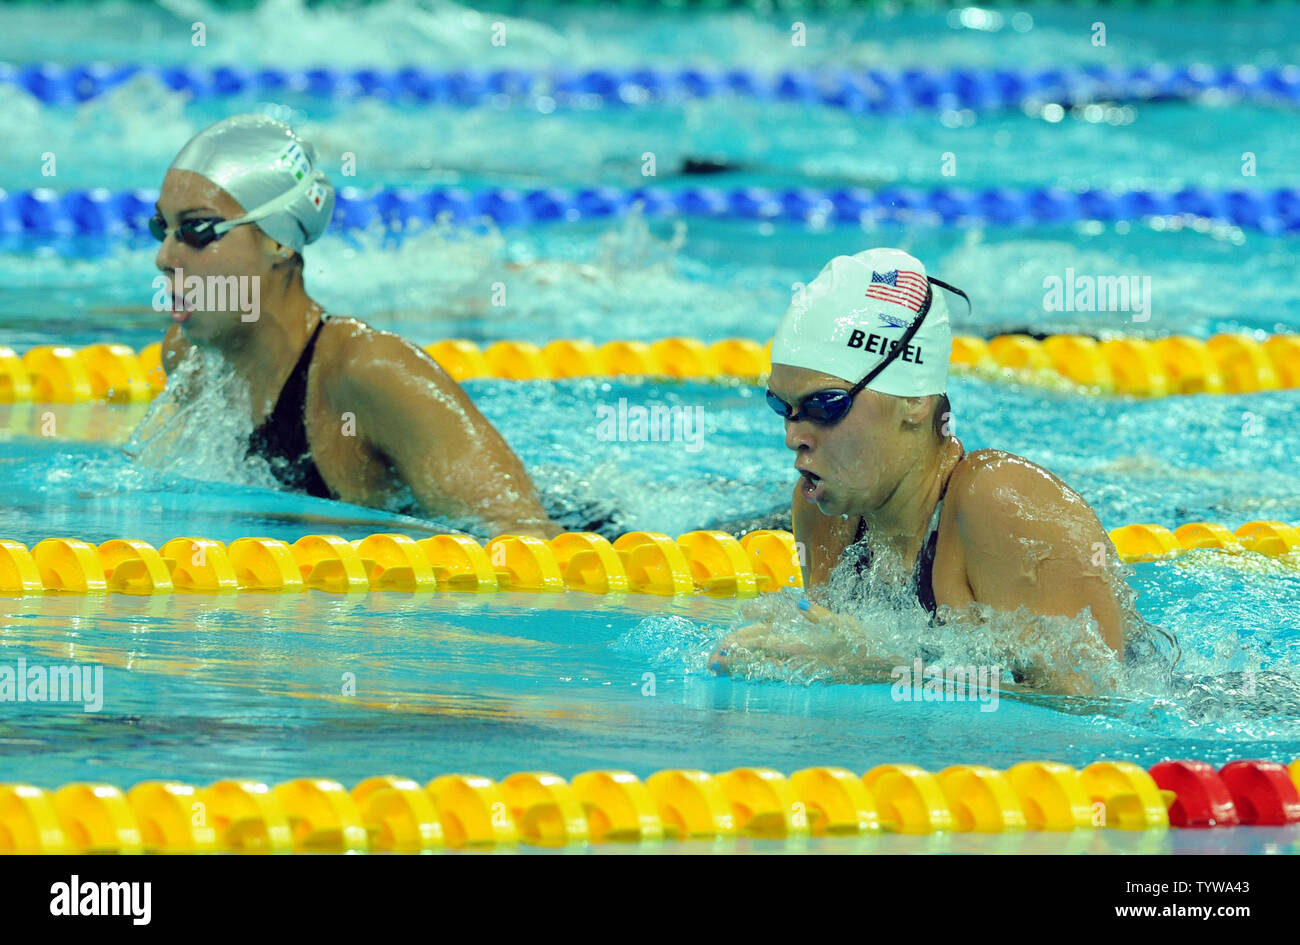 USA's Elizabeth Beisel (R) competes against Italy's Alessia Filippi in the Women's 400M individual medley at the National Aquatic Center (Water Cube) during the 2008 Summer Olympics in Beijing, China, on August 9, 2008. Beisel qualified first with a time of 4:34.55 and Filippi third at 4:35.11.    (UPI Photo/Roger L. Wollenberg) Stock Photo